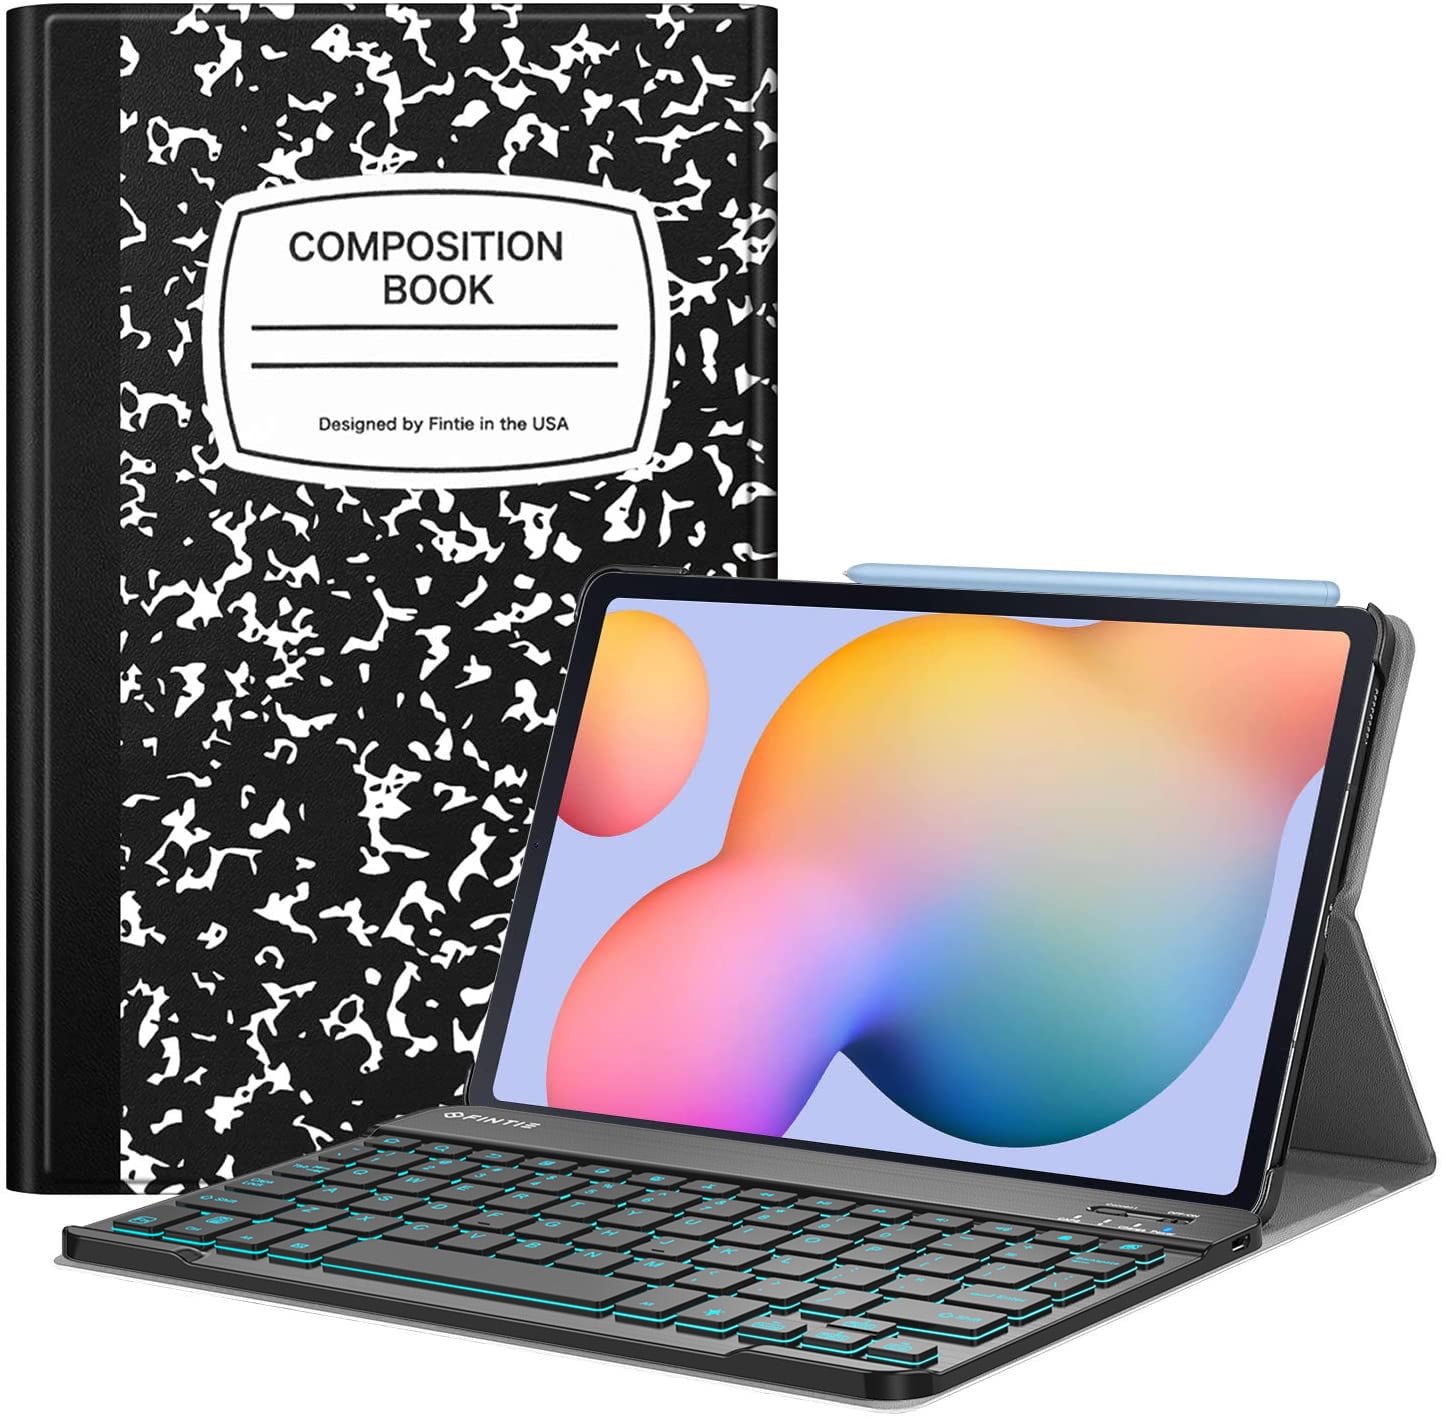 Keyboard Case for Samsung Galaxy Tab S6 Lite 10.4&amp;#39;&amp;#39; 2020 Model SM-P610/P615, Fintie [Secure S Pen Holder] Slim Cover w/Detachable Wireless Bluetooth Keyboard, 7 Color Backlight